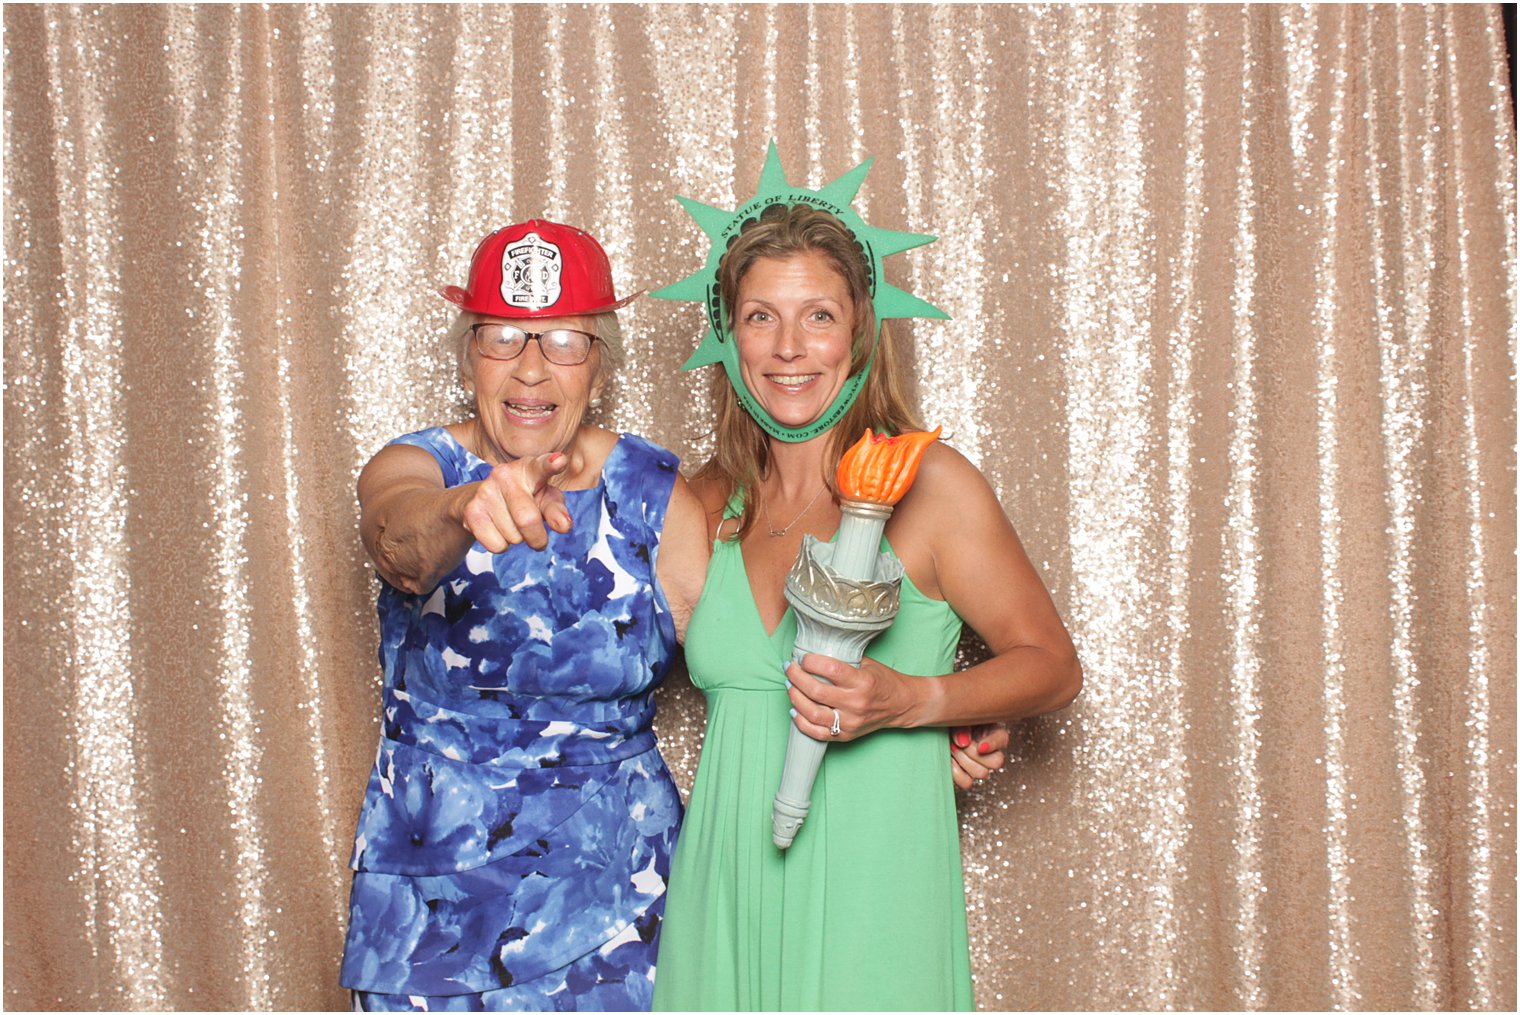 woman wears firefighter hat while second woman wears lady Liberty props in Minerals Resort photo booth